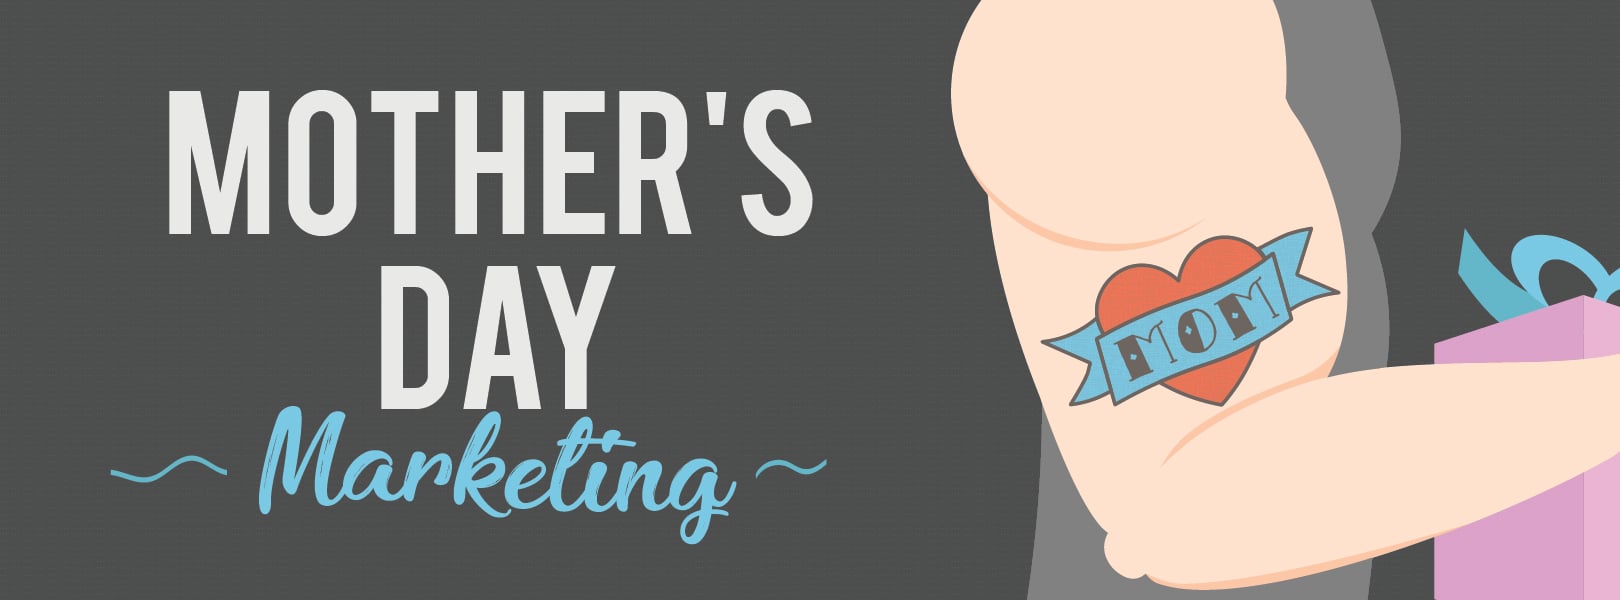 Mother’s Day: Set Your Store Up for More Sales